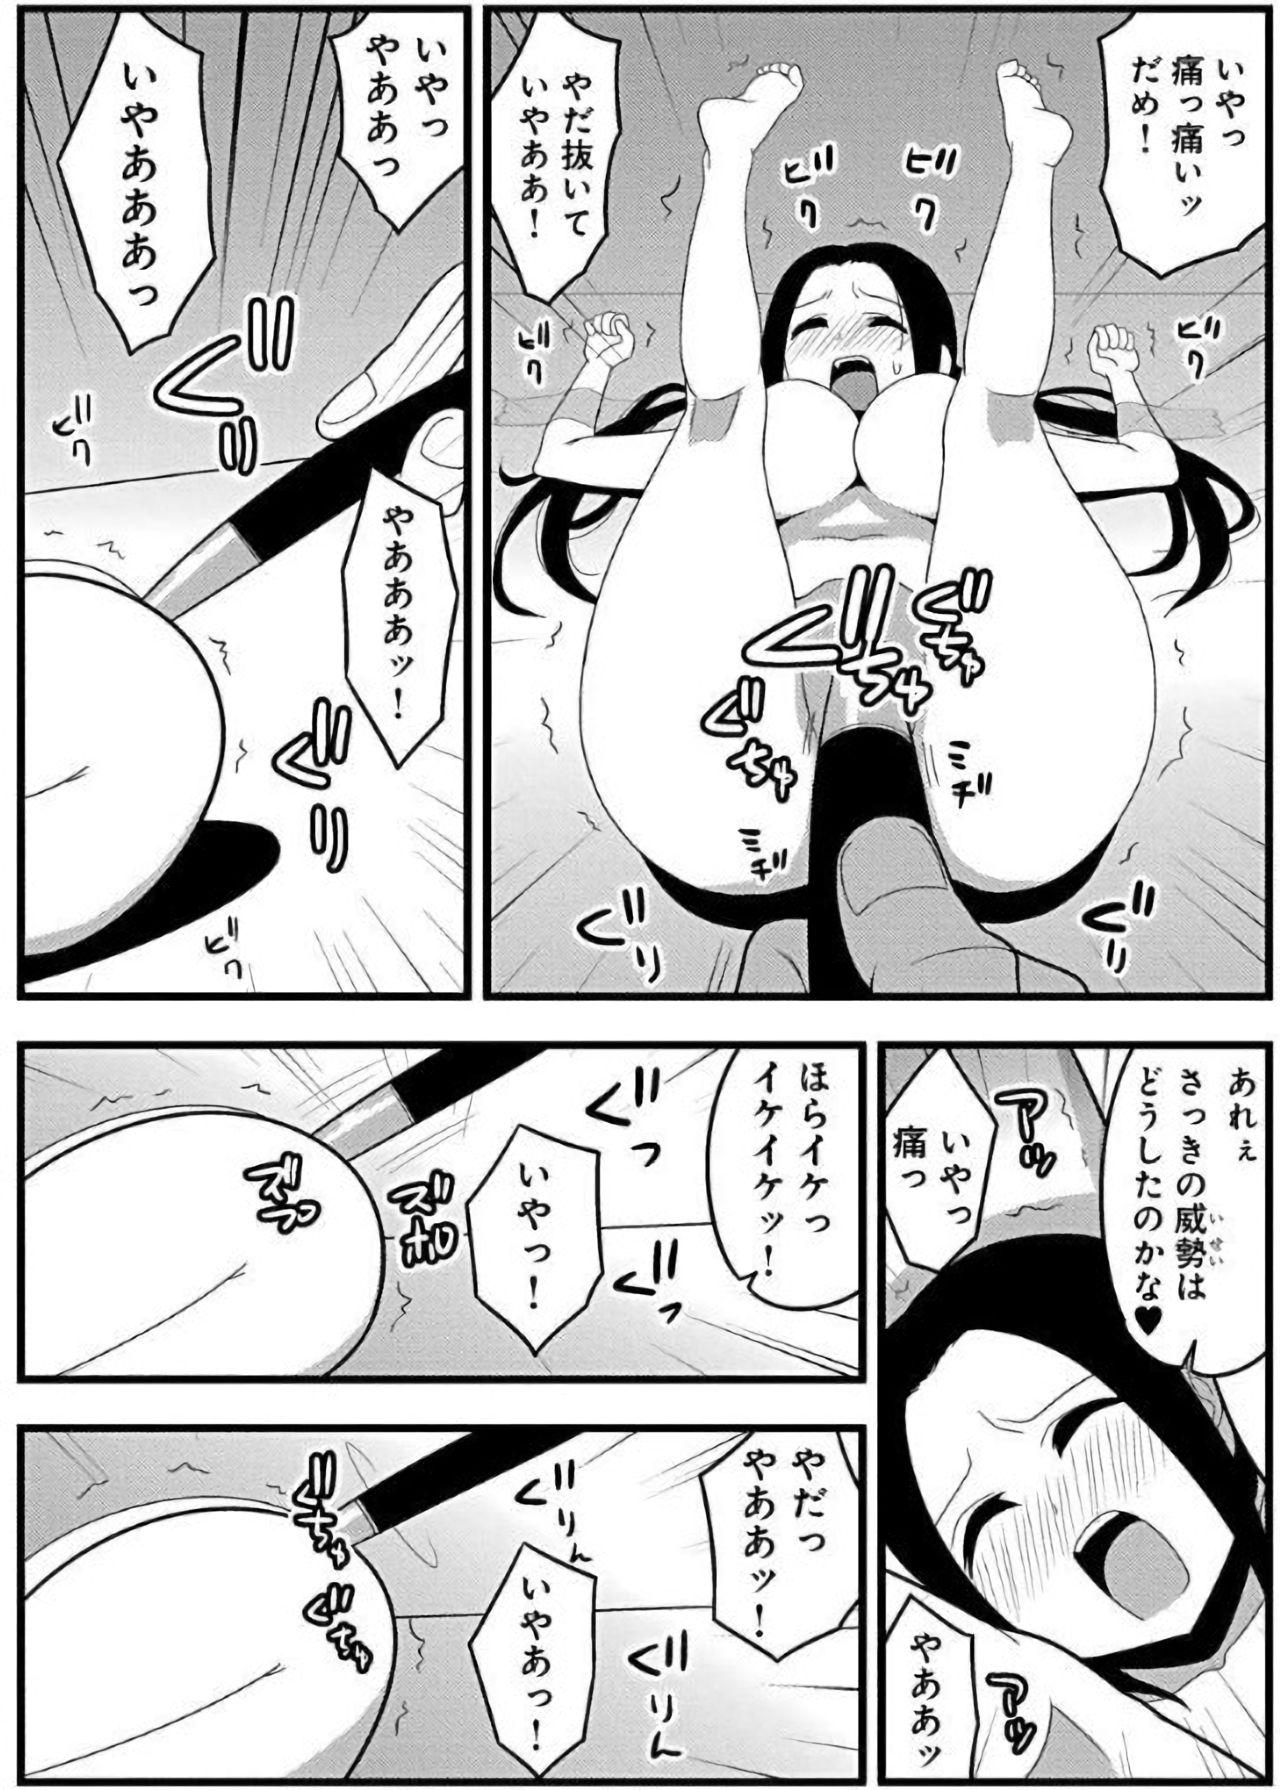 Delicia ズボズボエロアプリ１７～極小の女の子と特大のアレ～ White - Page 15